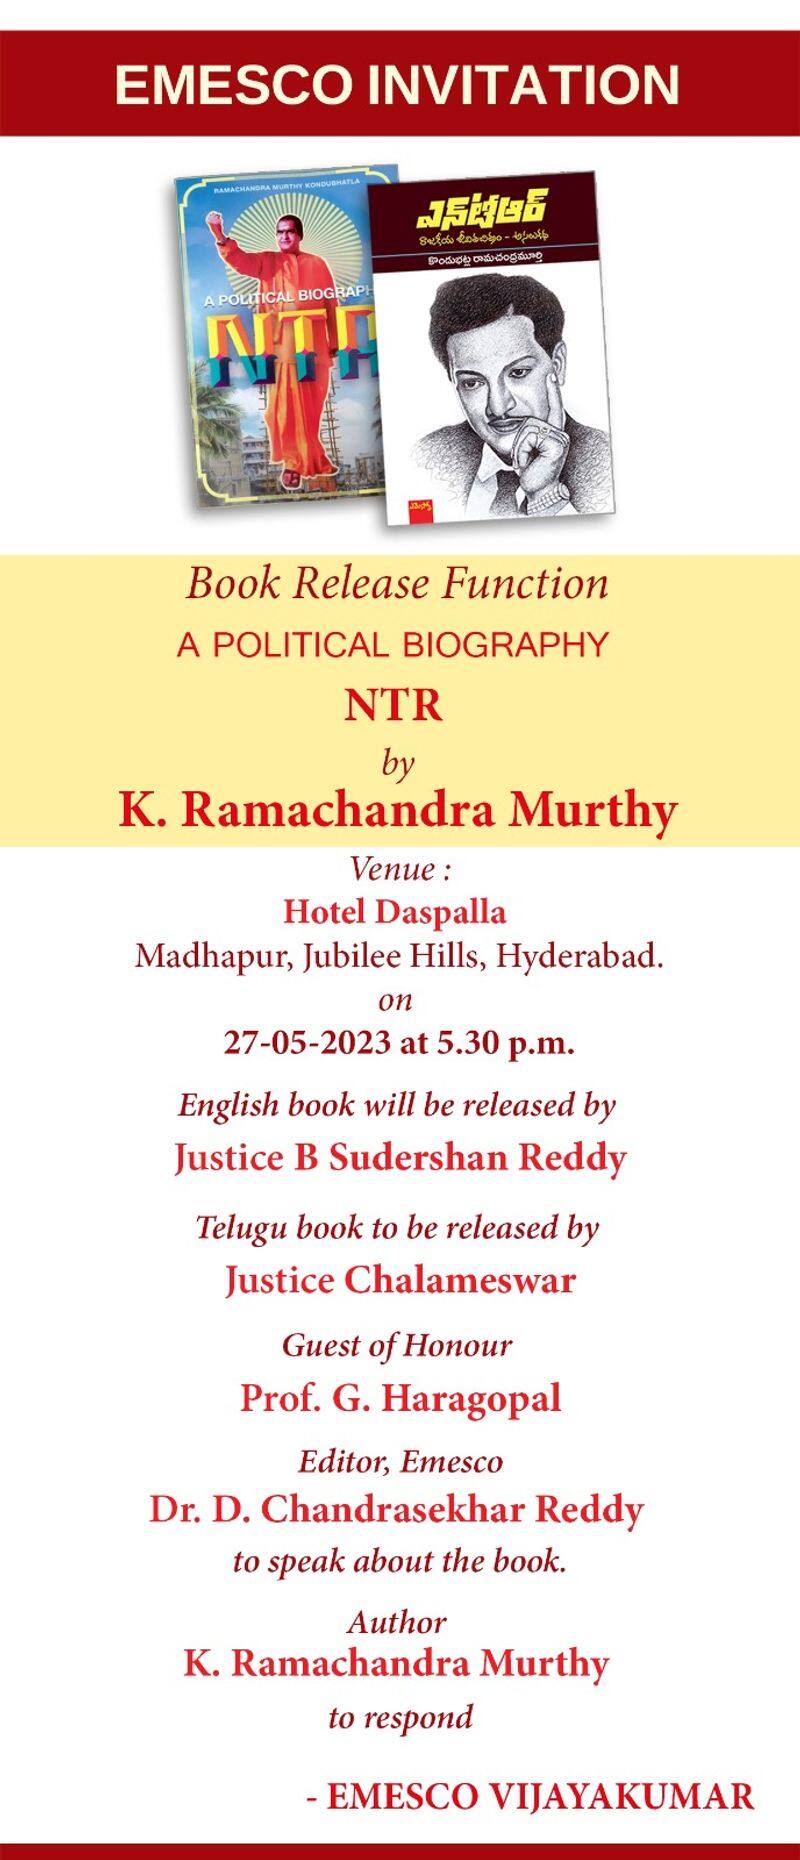 NTR : A Political Biography book release - bsb